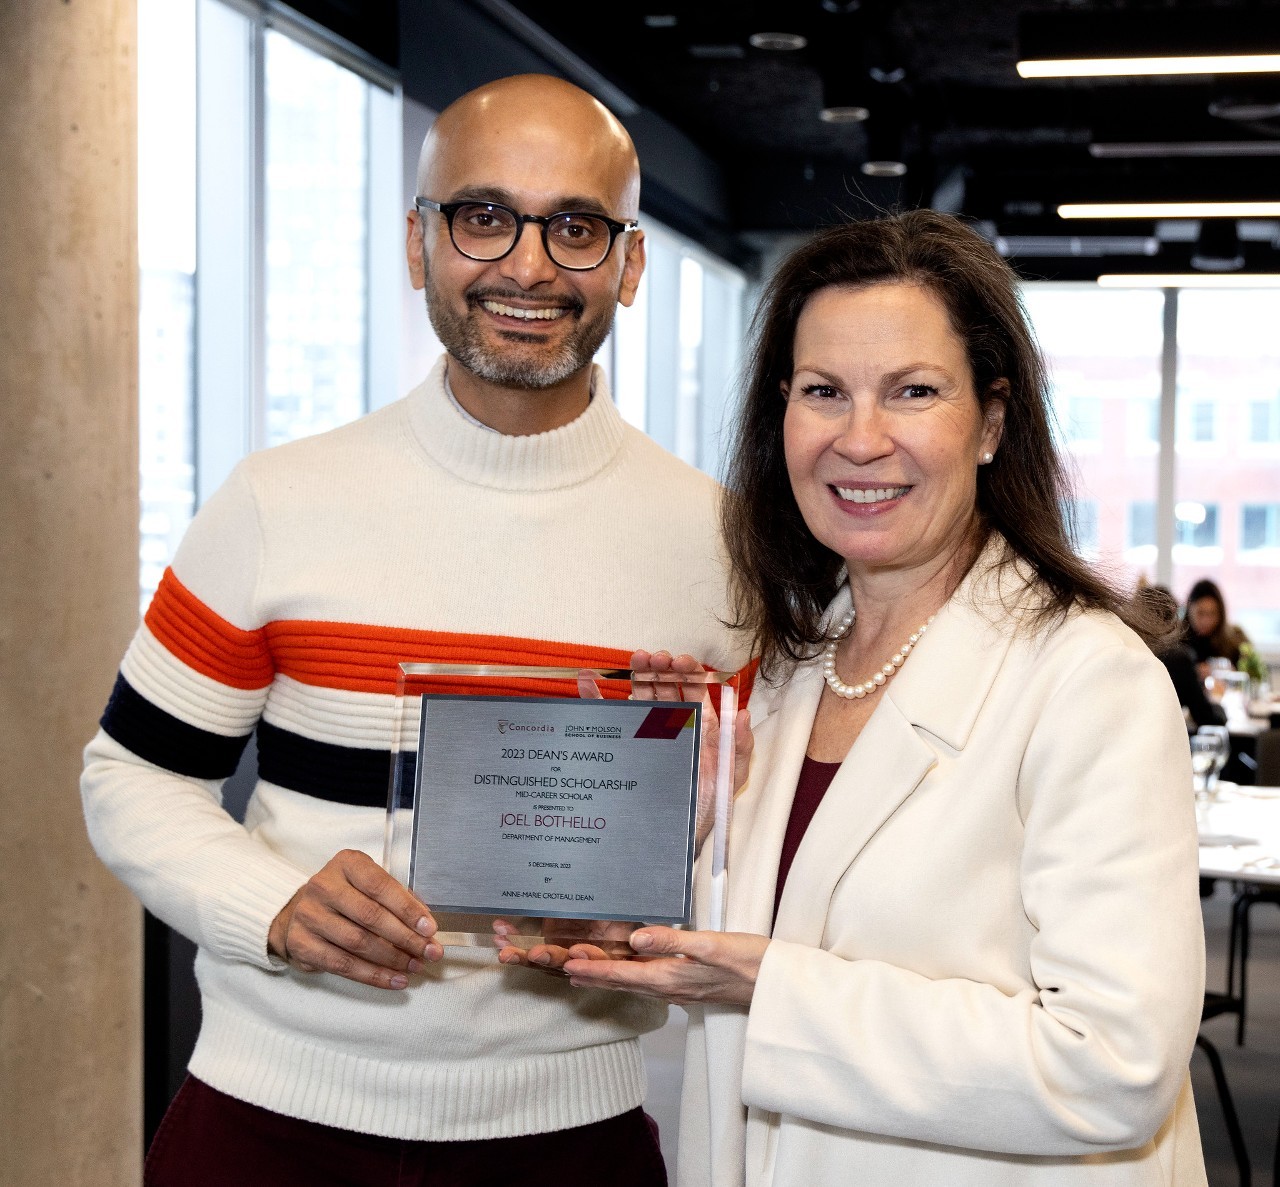 Joel Bothello accepts his award for Distinguished Scholarship: Mid-Career Scholar alongside Dean Anne-Marie Croteau